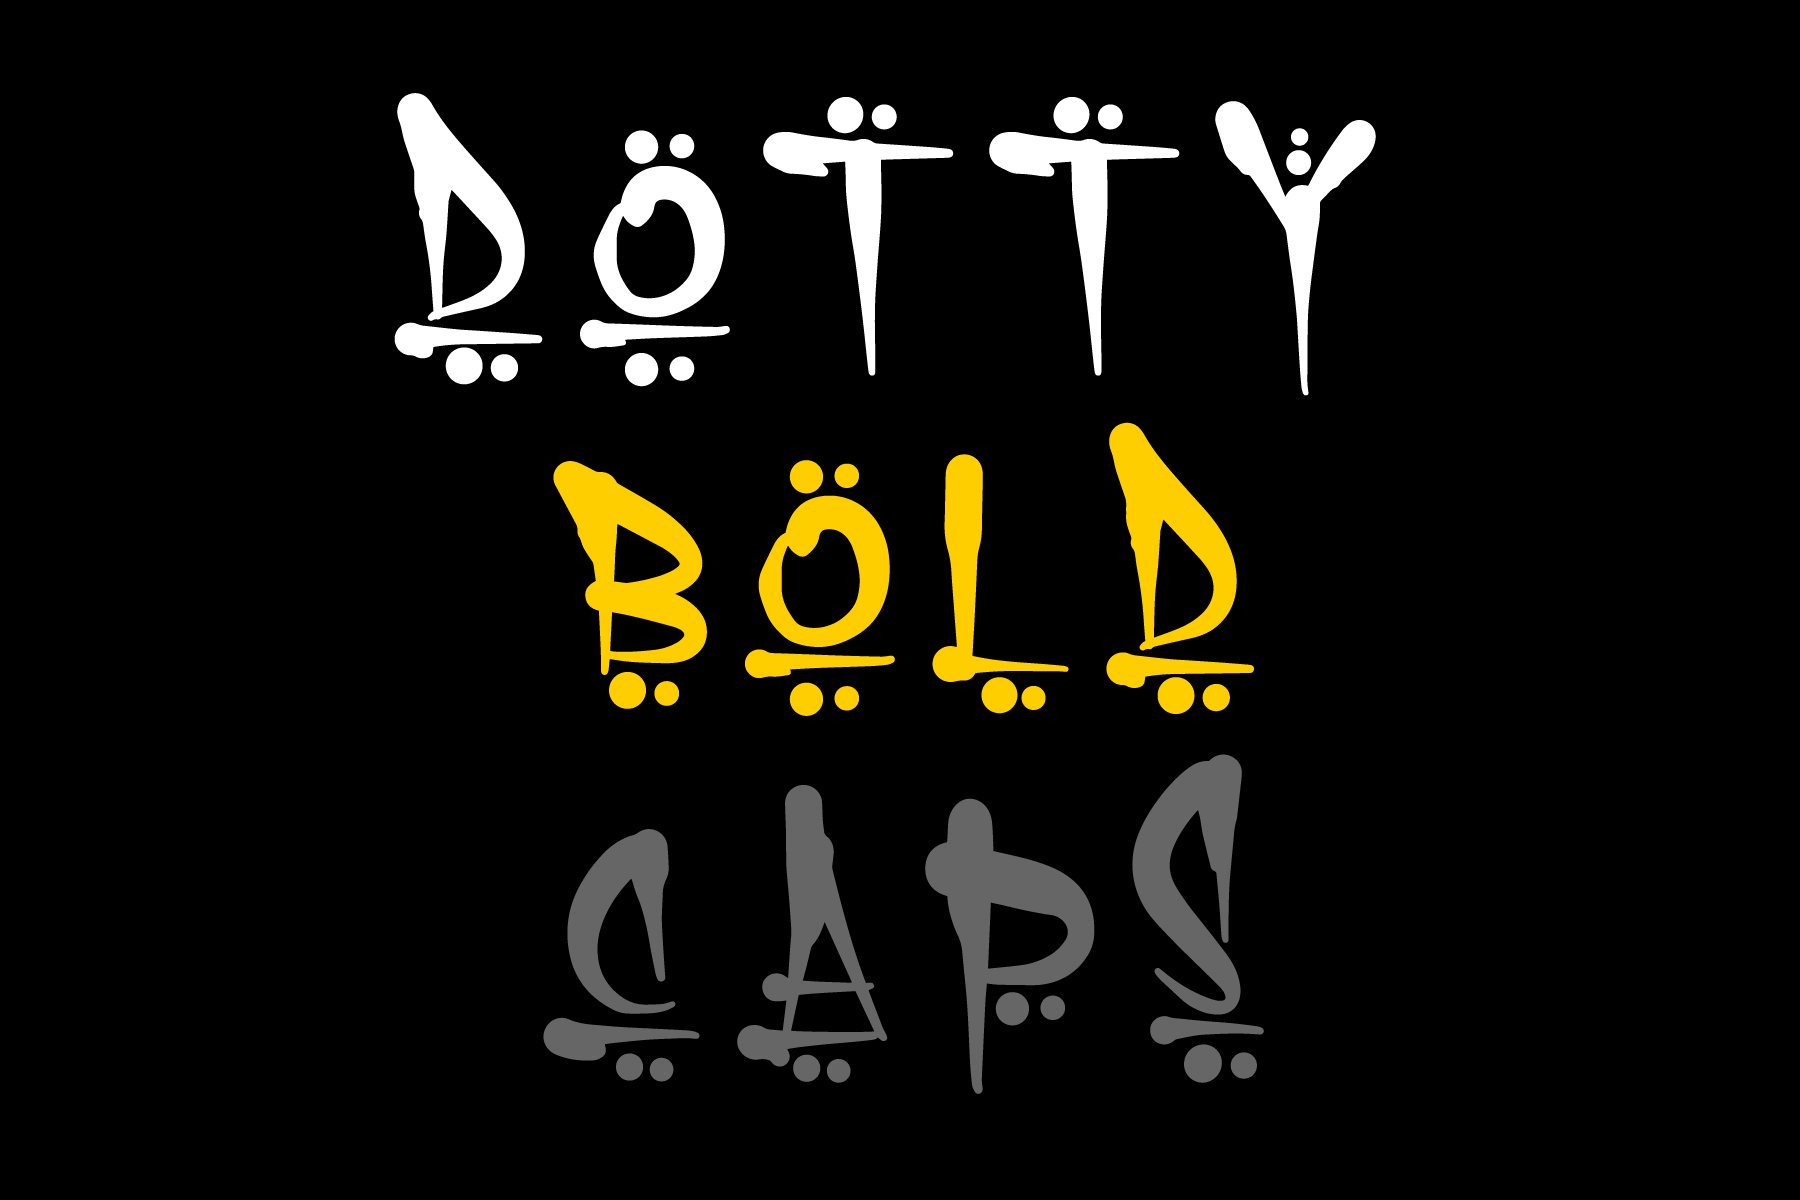 DOTTY BOLD CAPS cover image.